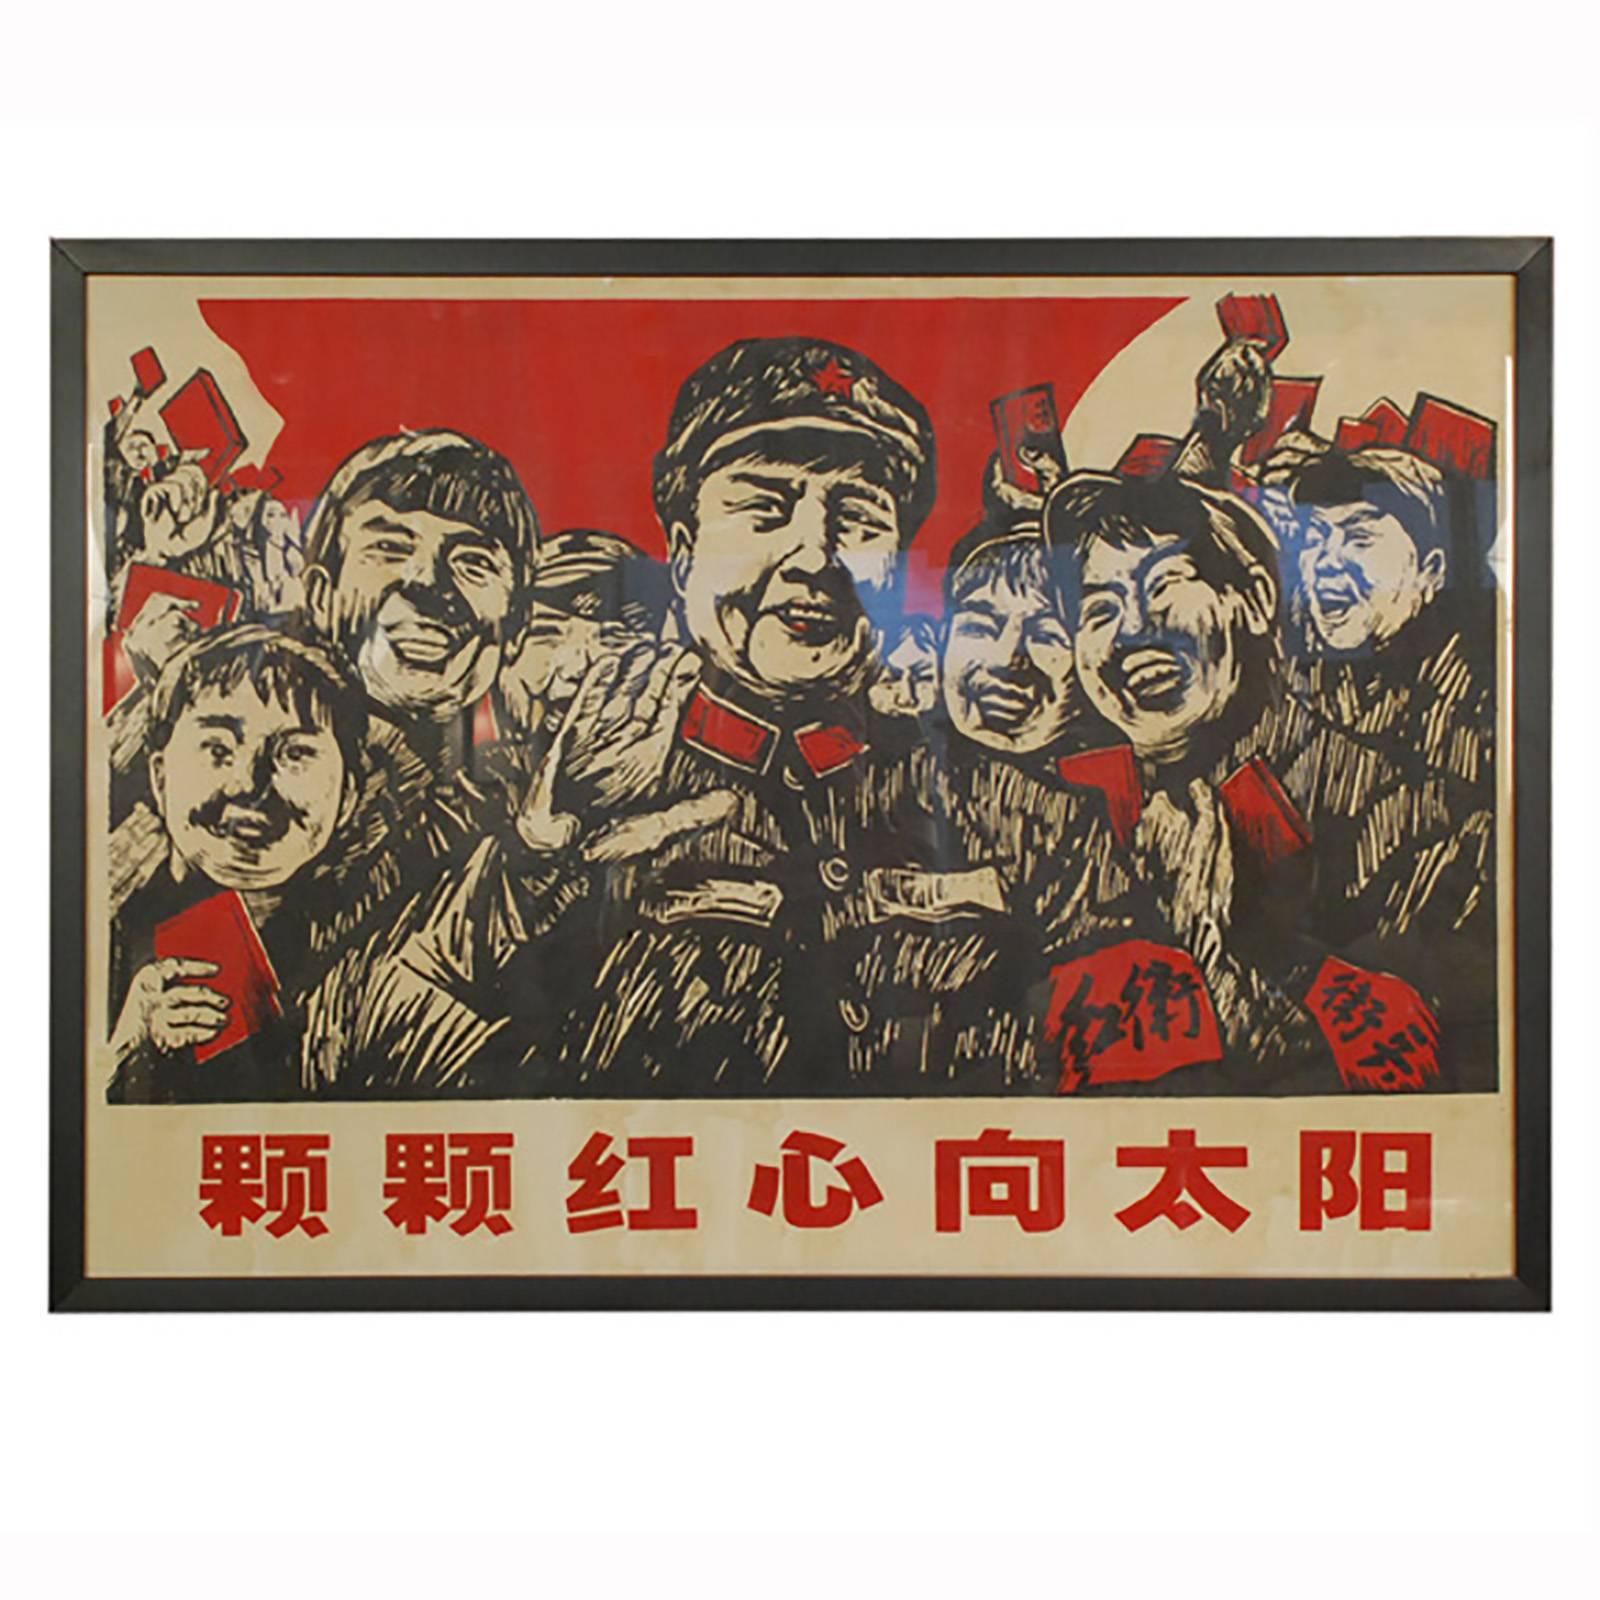 This early 20th century cultural revolution poster is a woodcut, an ancient form that was given new life by young artists trying to create a new style that derived neither from the West or elitist Chinese art. It is an authentic piece of history